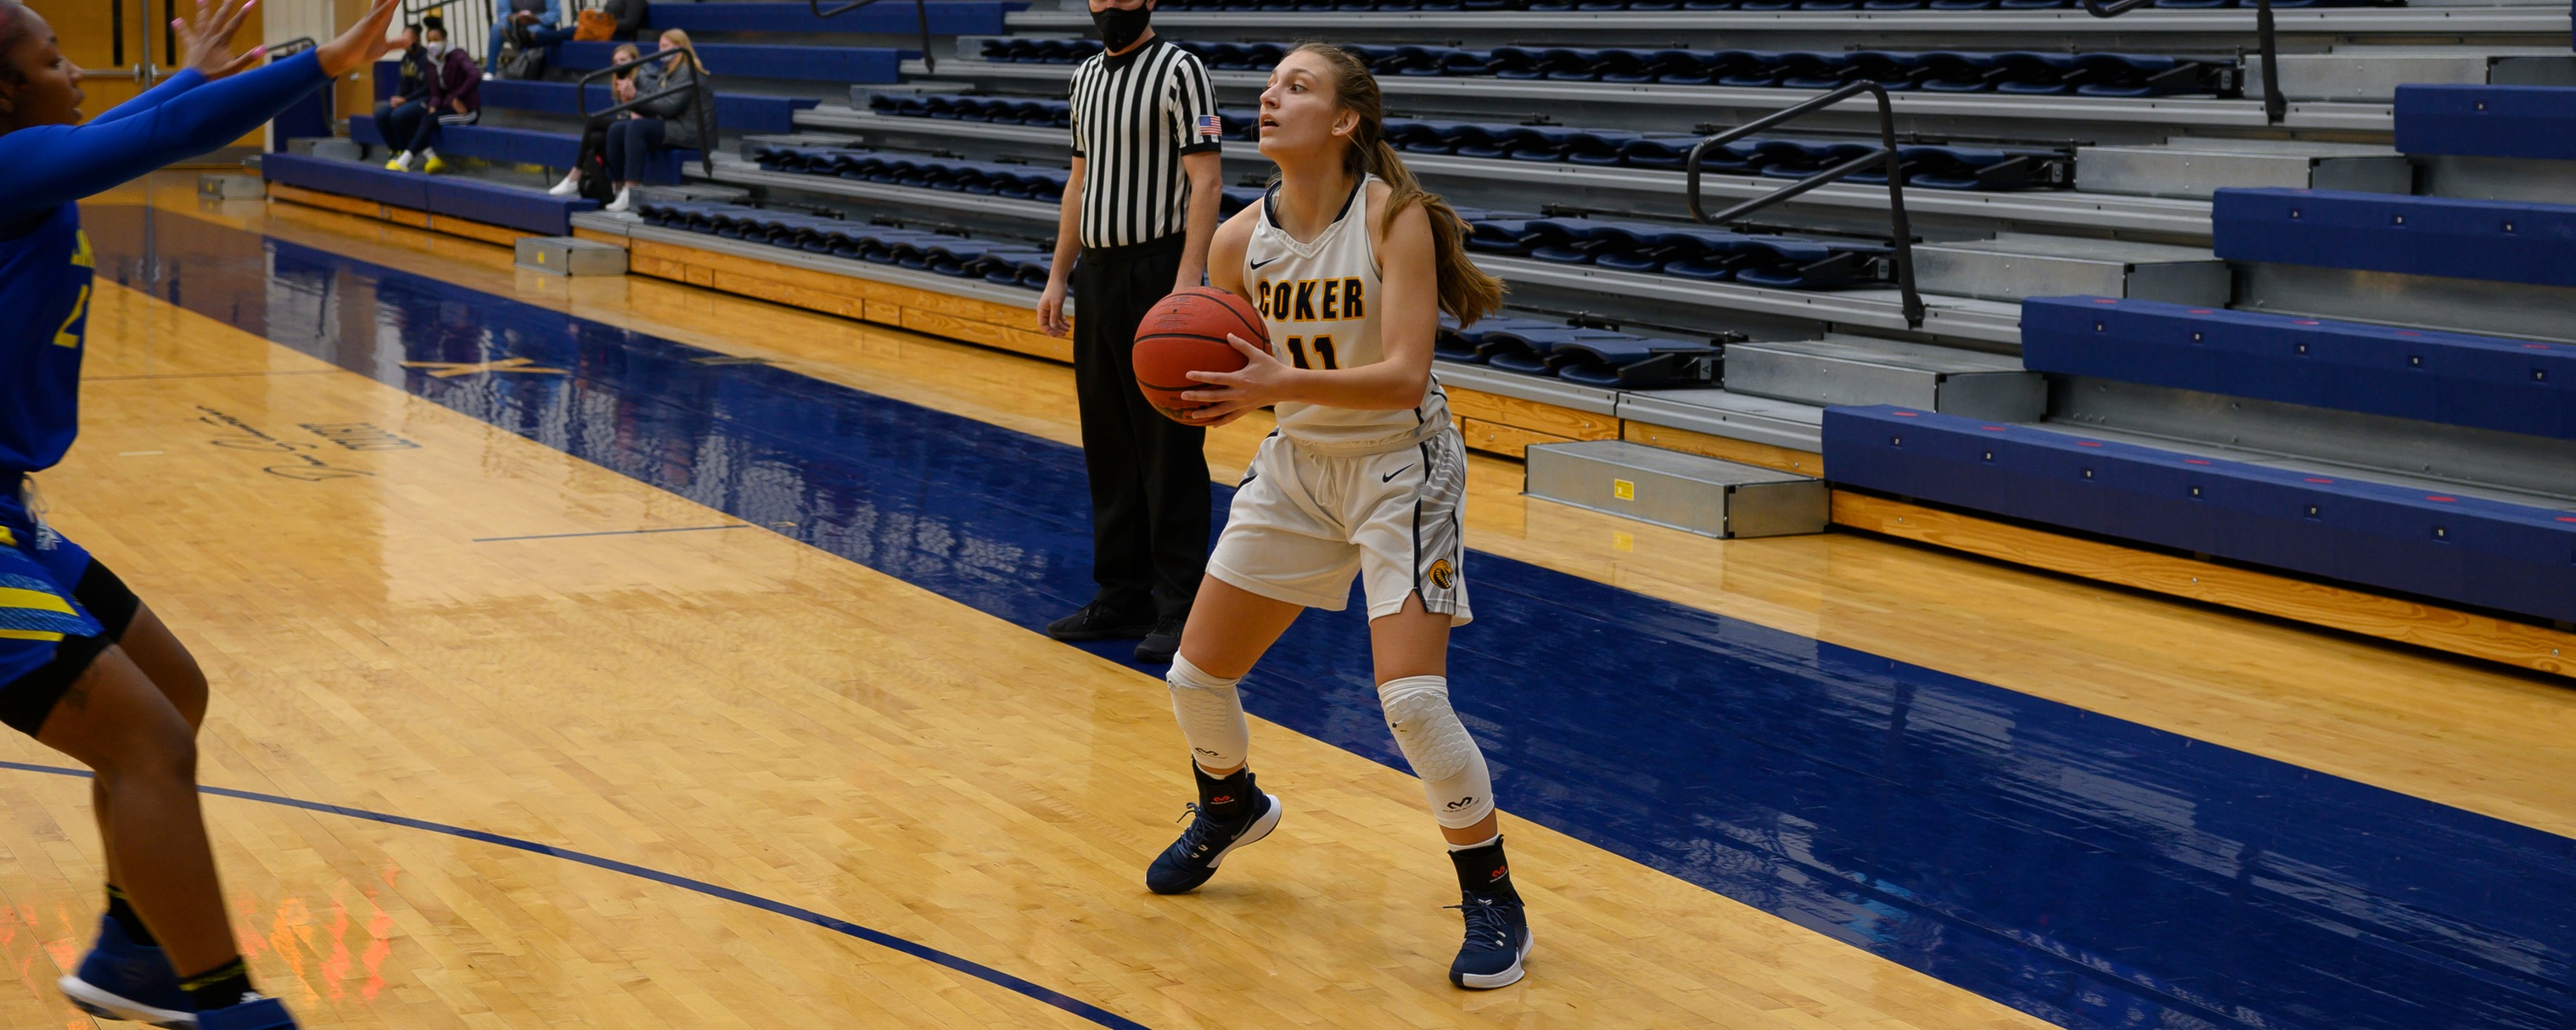 Women's Basketball Drops Conference Contest at No. 10 Tusulum on Saturday